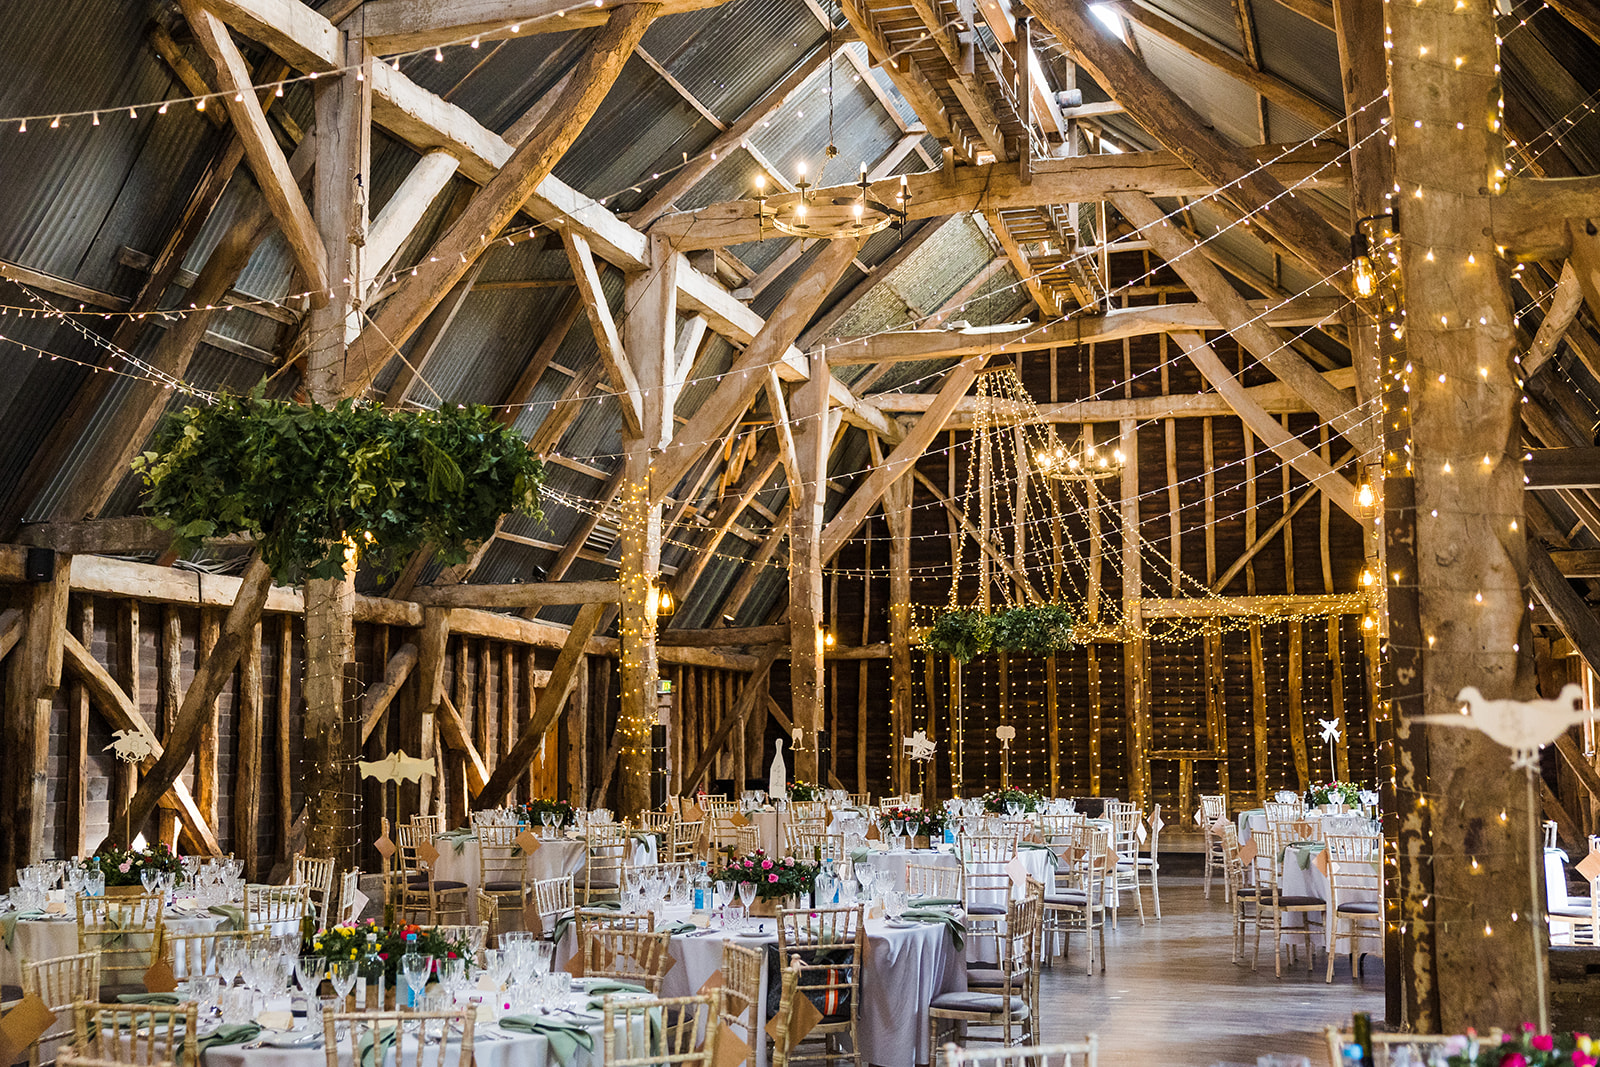 Wedding venue set up with decor at the Manor Barn in Harlton